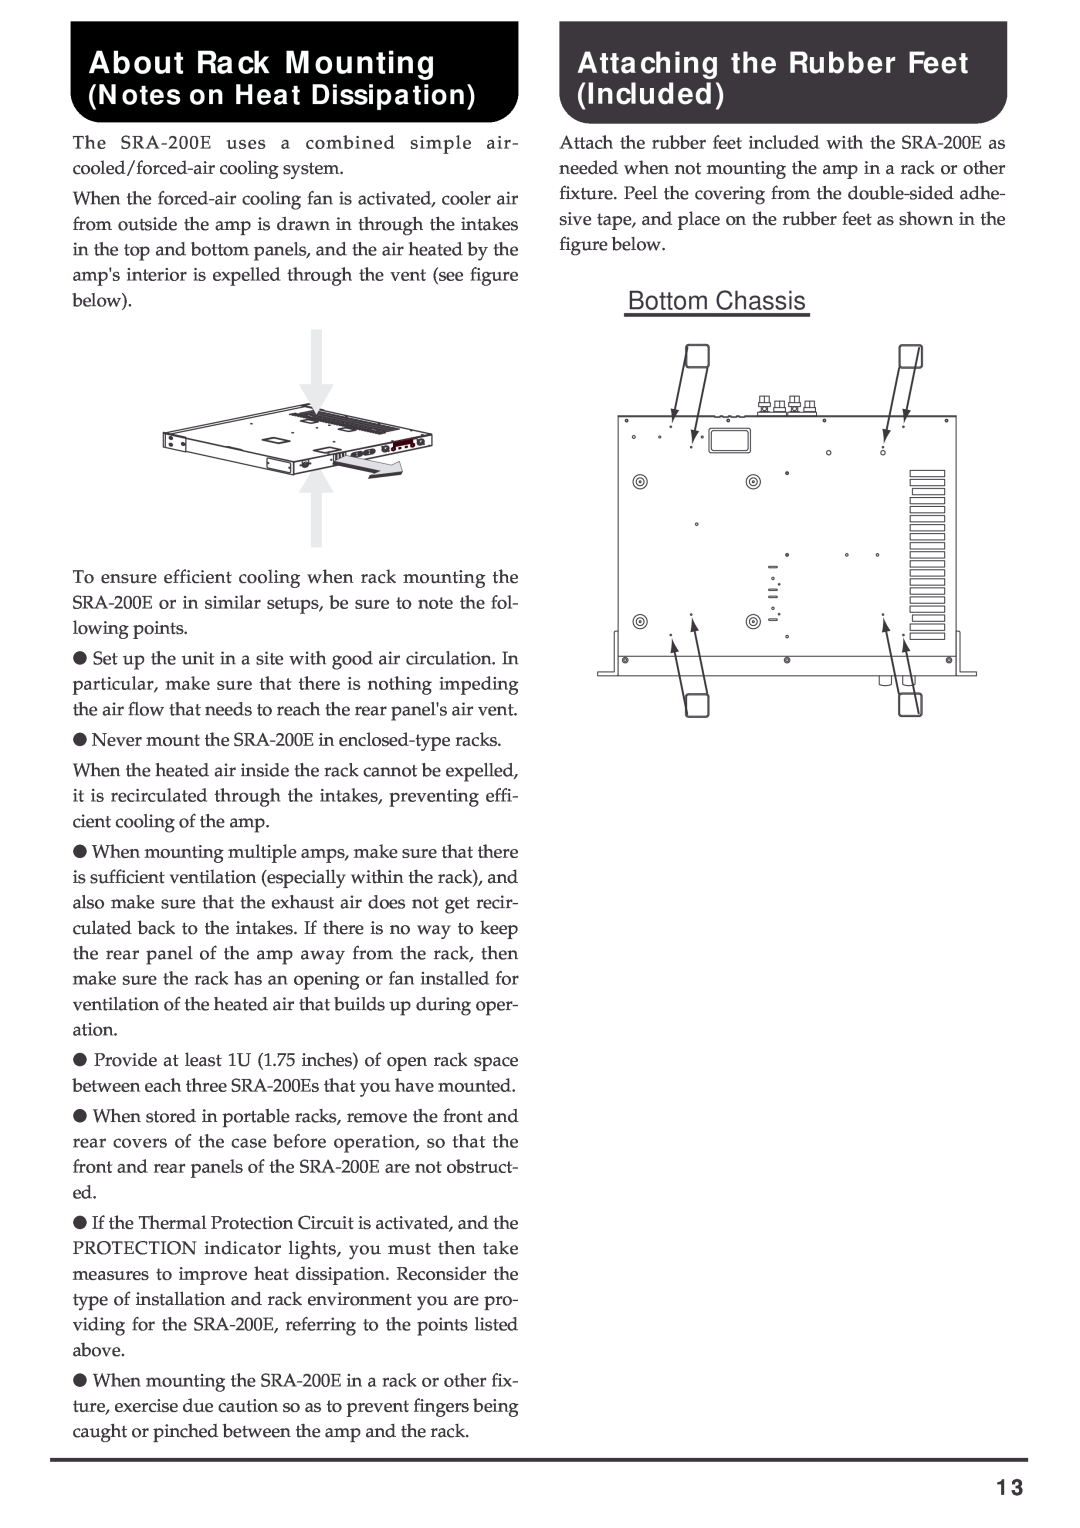 Roland SRA-200E Bottom Chassis, About Rack Mounting, Attaching the Rubber Feet Included, Notes on Heat Dissipation 